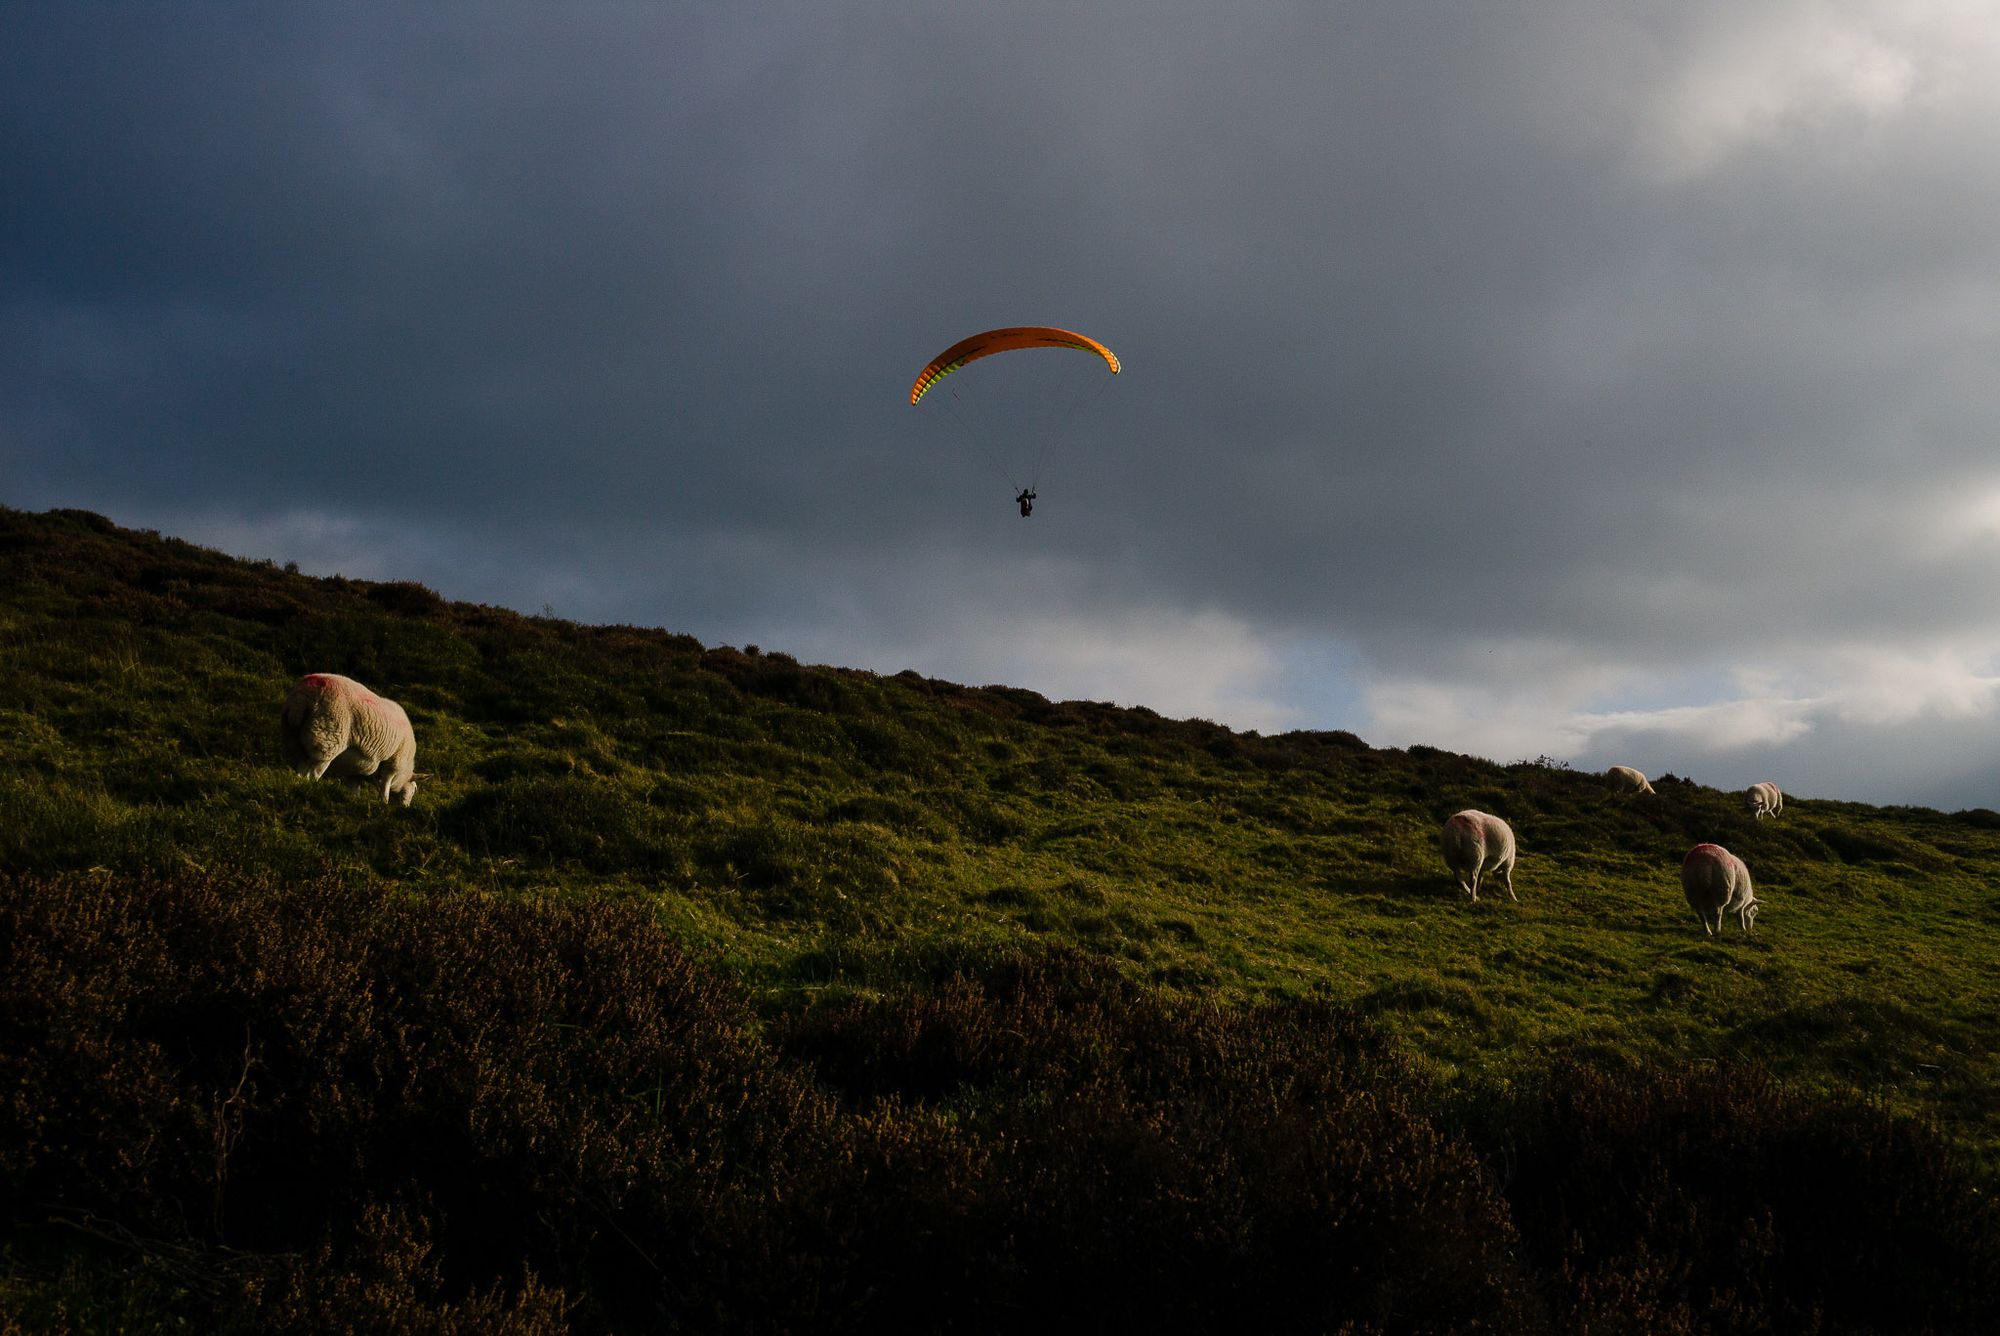 Landscape view with sheep grazing on the side of a hill. There is a paraglider flying over the hill.